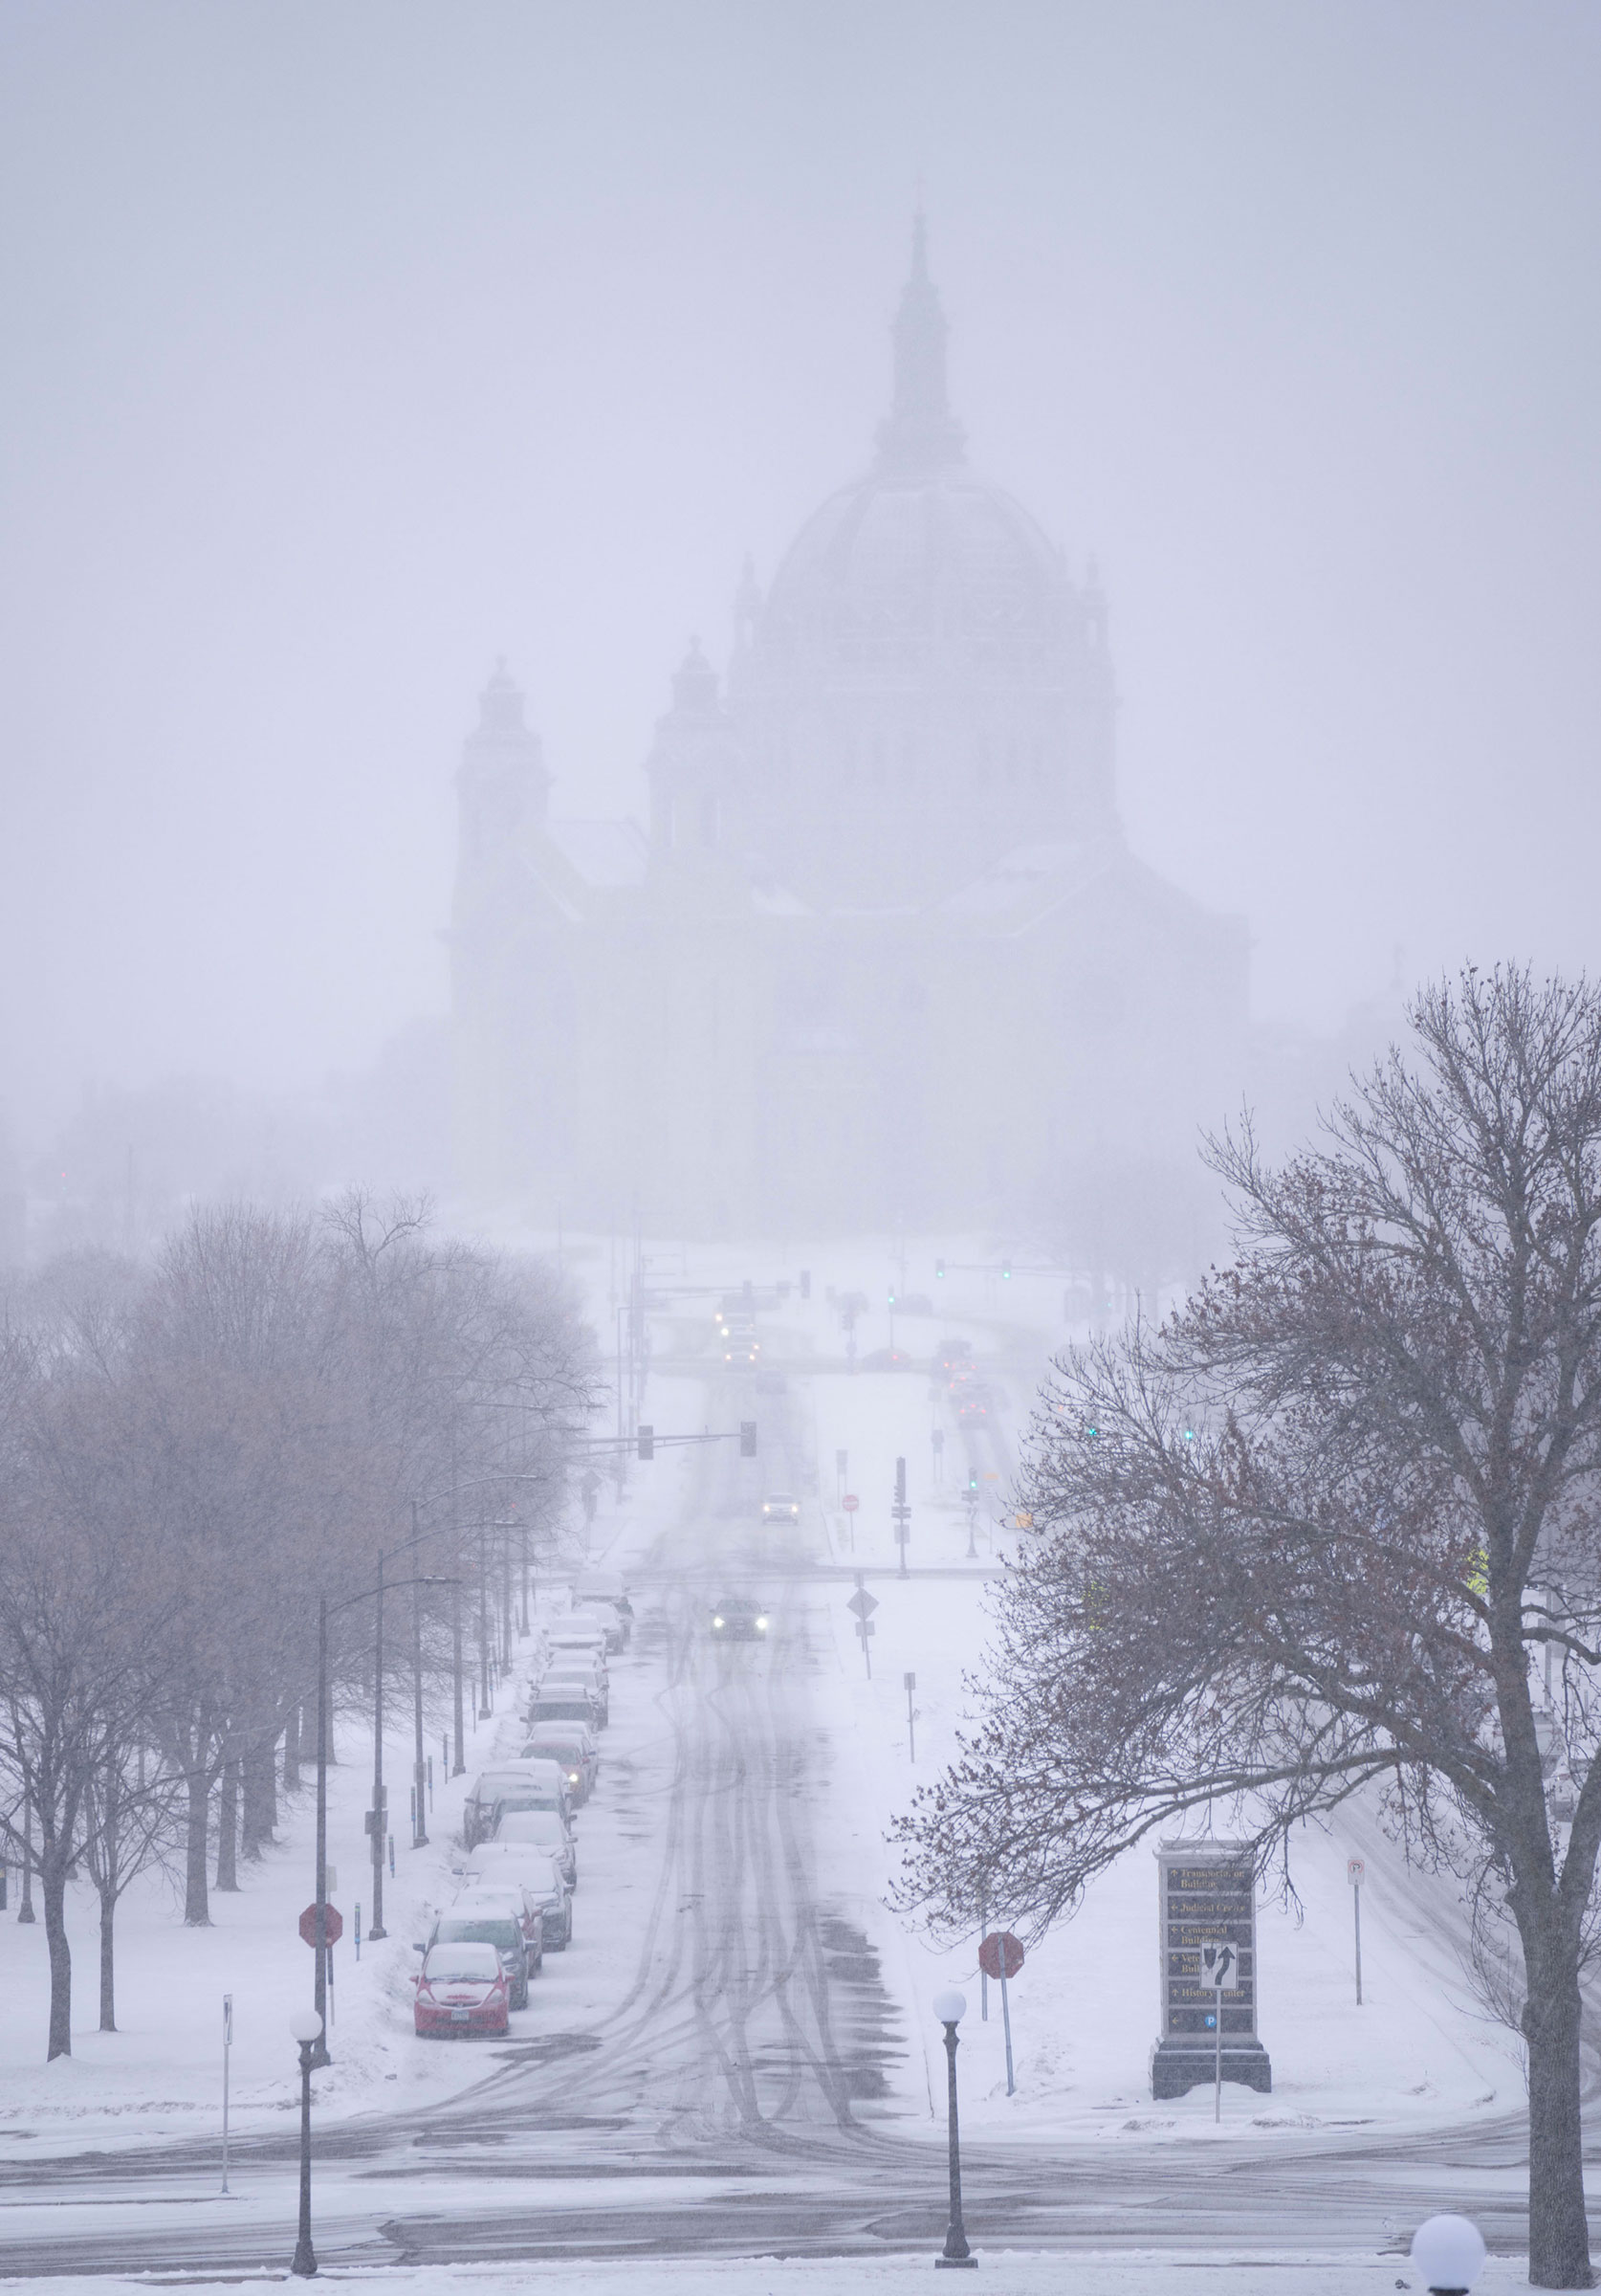 Snow begins to fall around the Cathedral of Saint Paul at the Minnesota State Capitol in St. Paul, Minn., on Feb. 21, 2023. (Alex Kormann—Star Tribune/AP)